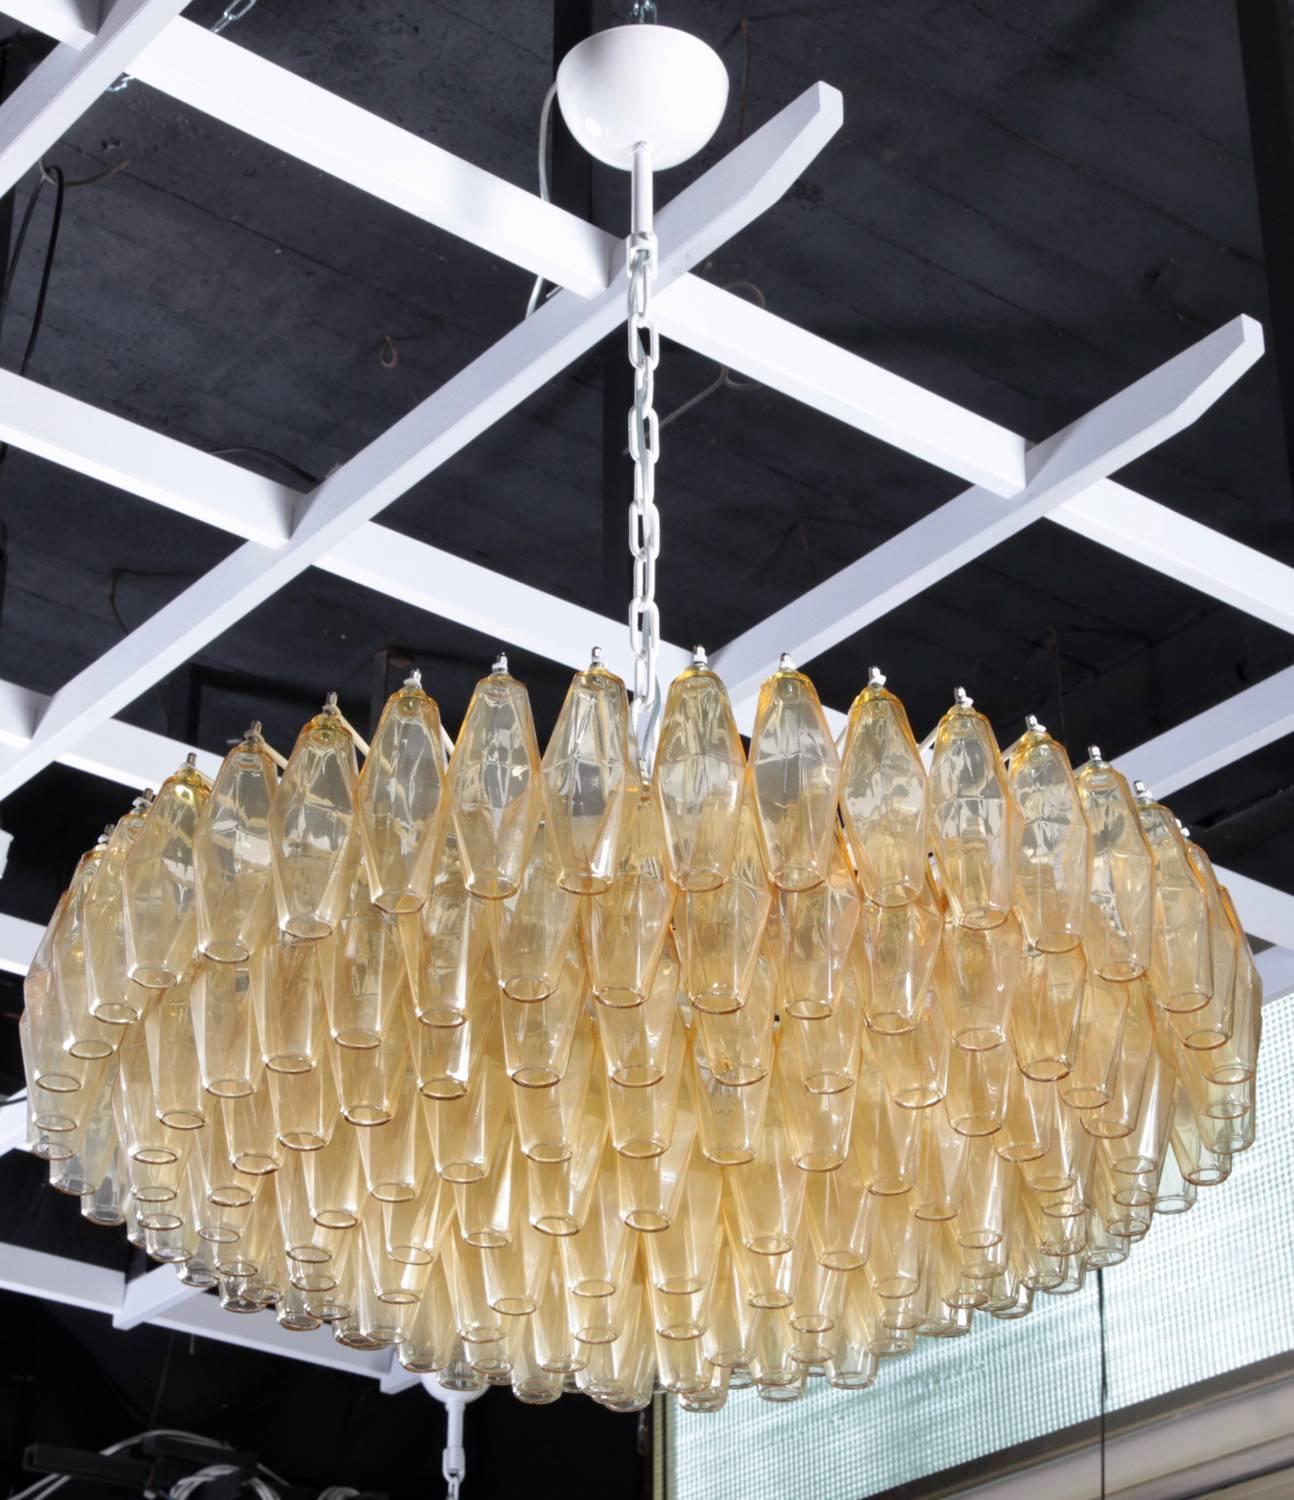 Very huge hand blown amber Murano glass poliedri or polyhedral chandelier. The chandelier has a impressive size and is in very good condition. Eight E14 bulbs.
To be on the safe side, the lamp should be checked locally by a specialist concerning